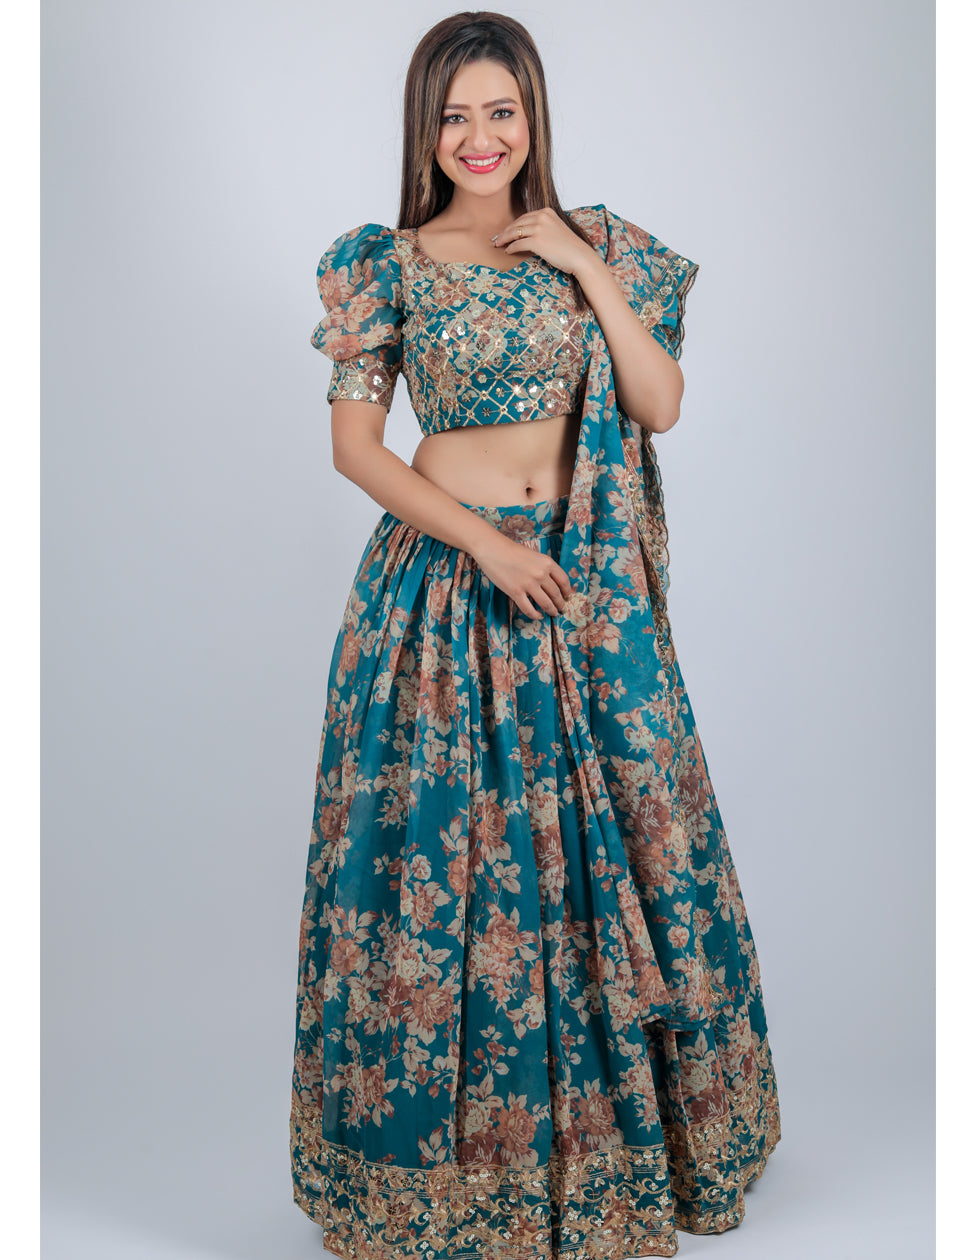 Turquiose Georgette Printed And Embroidery Work Partywear Lehenga Choli